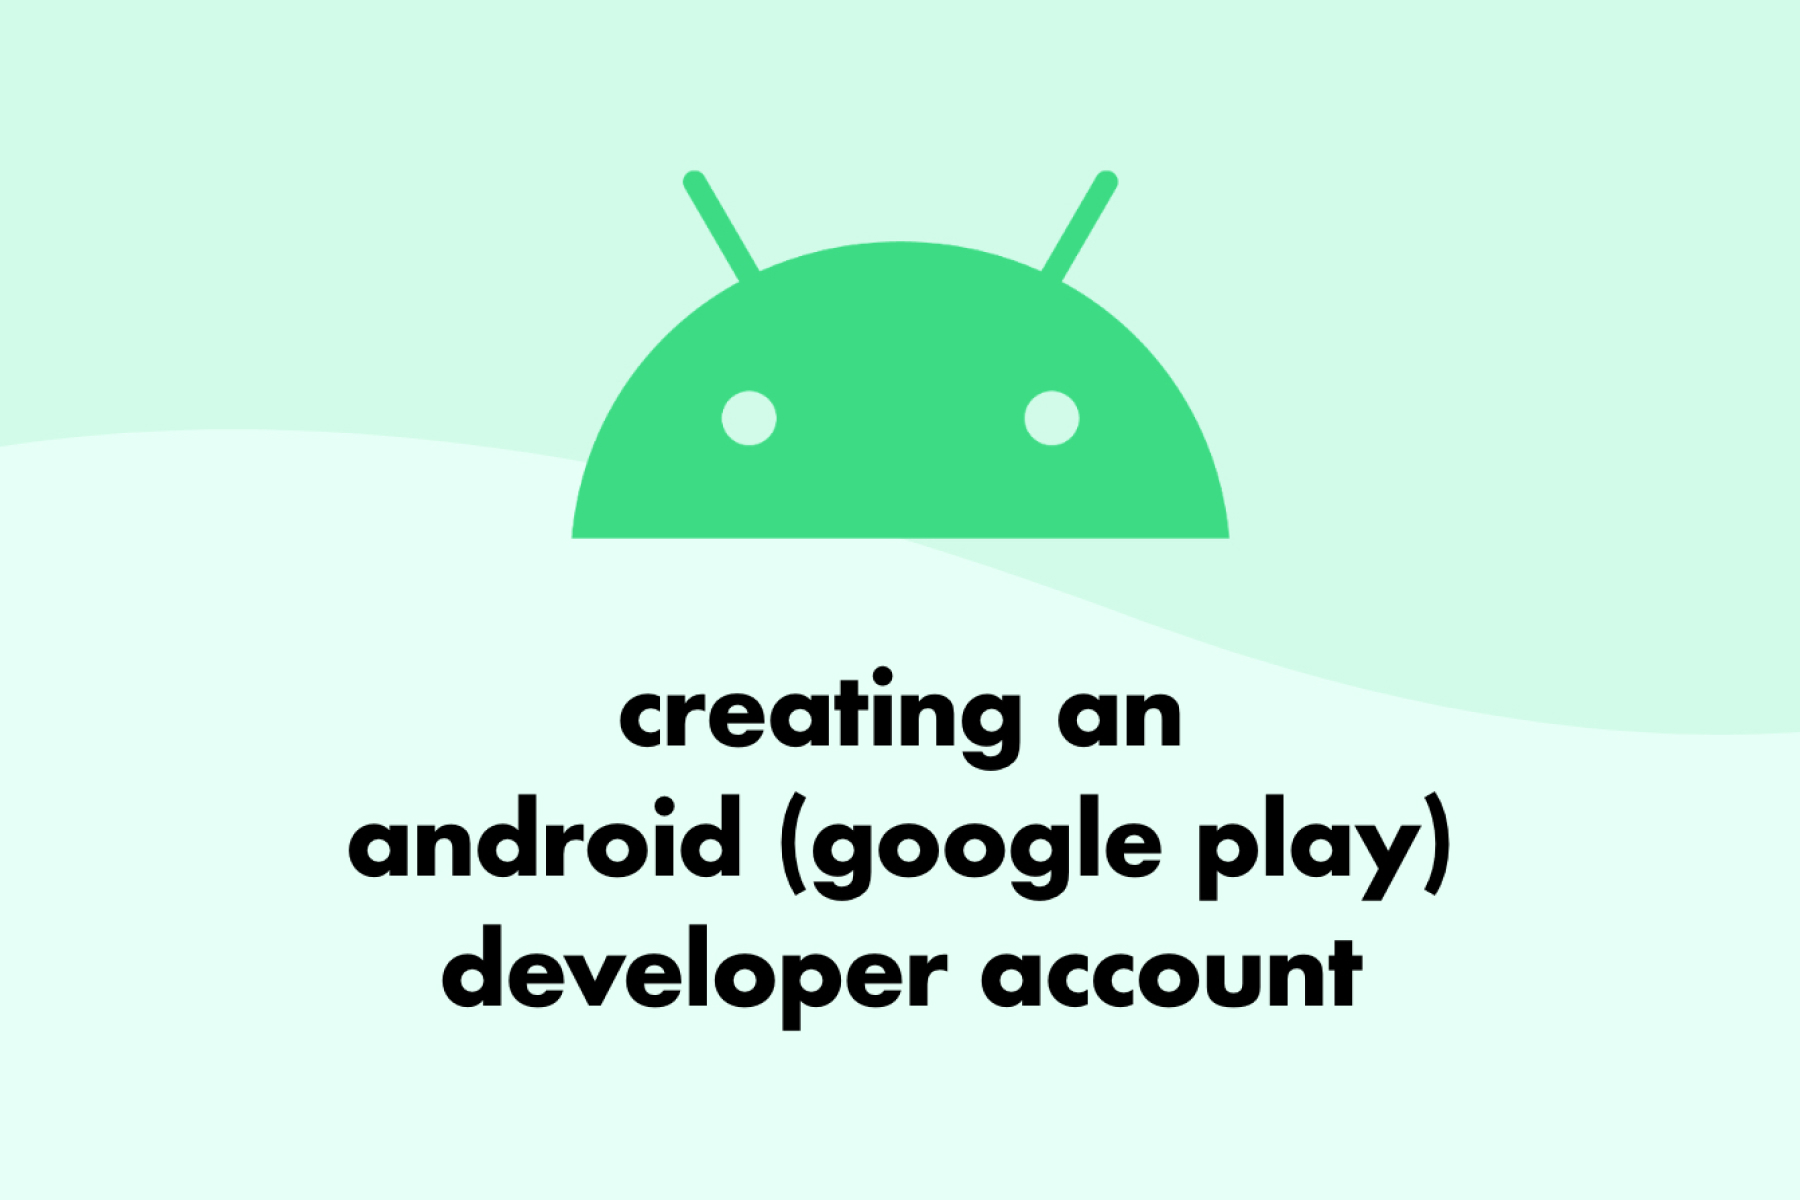 Creating an Android Developer Account Image